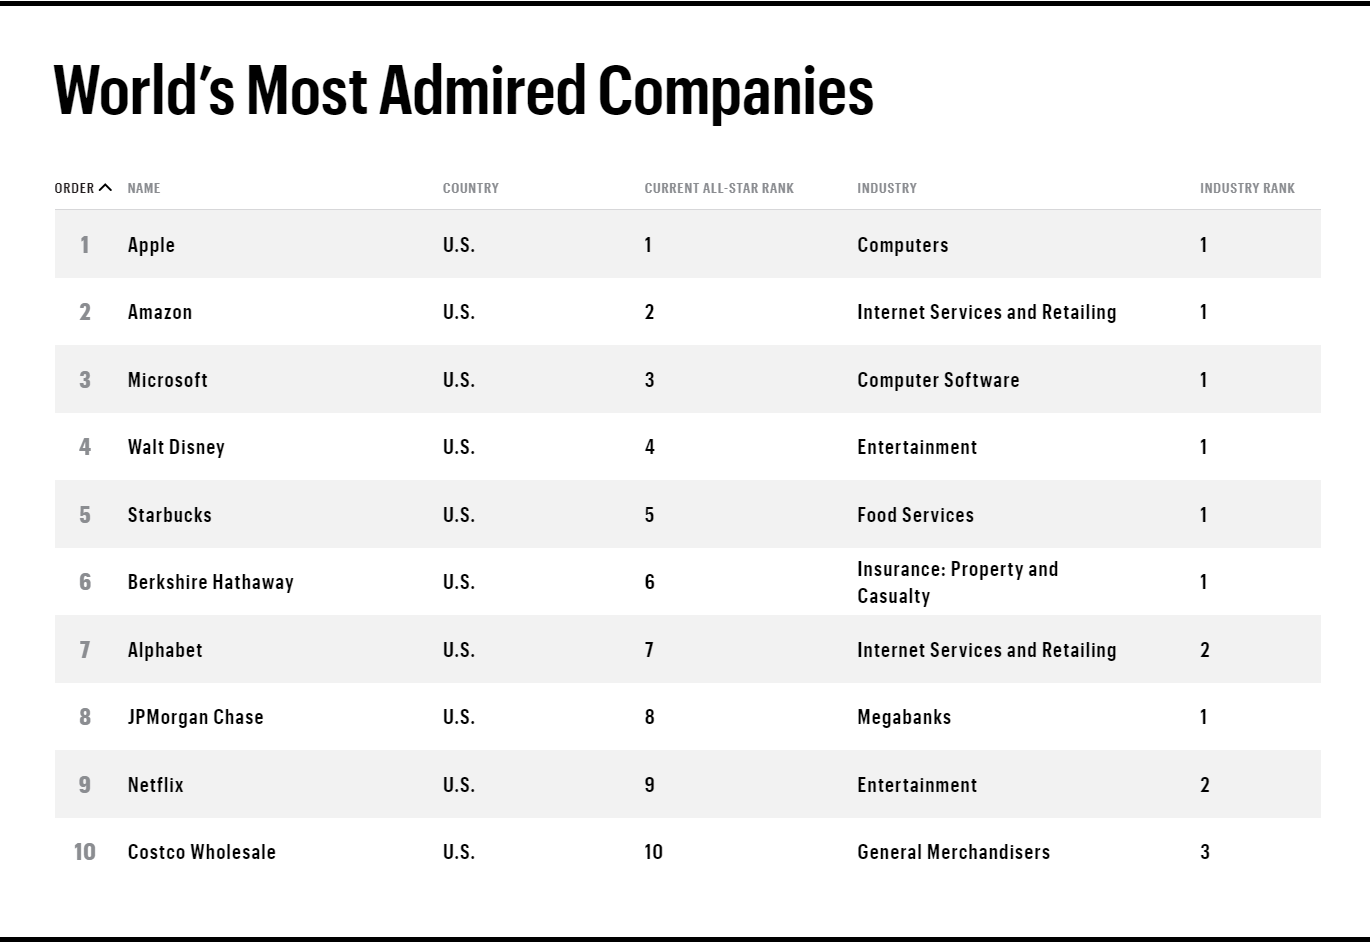 These Are The Most Admired Companies Globally, According To Fortune